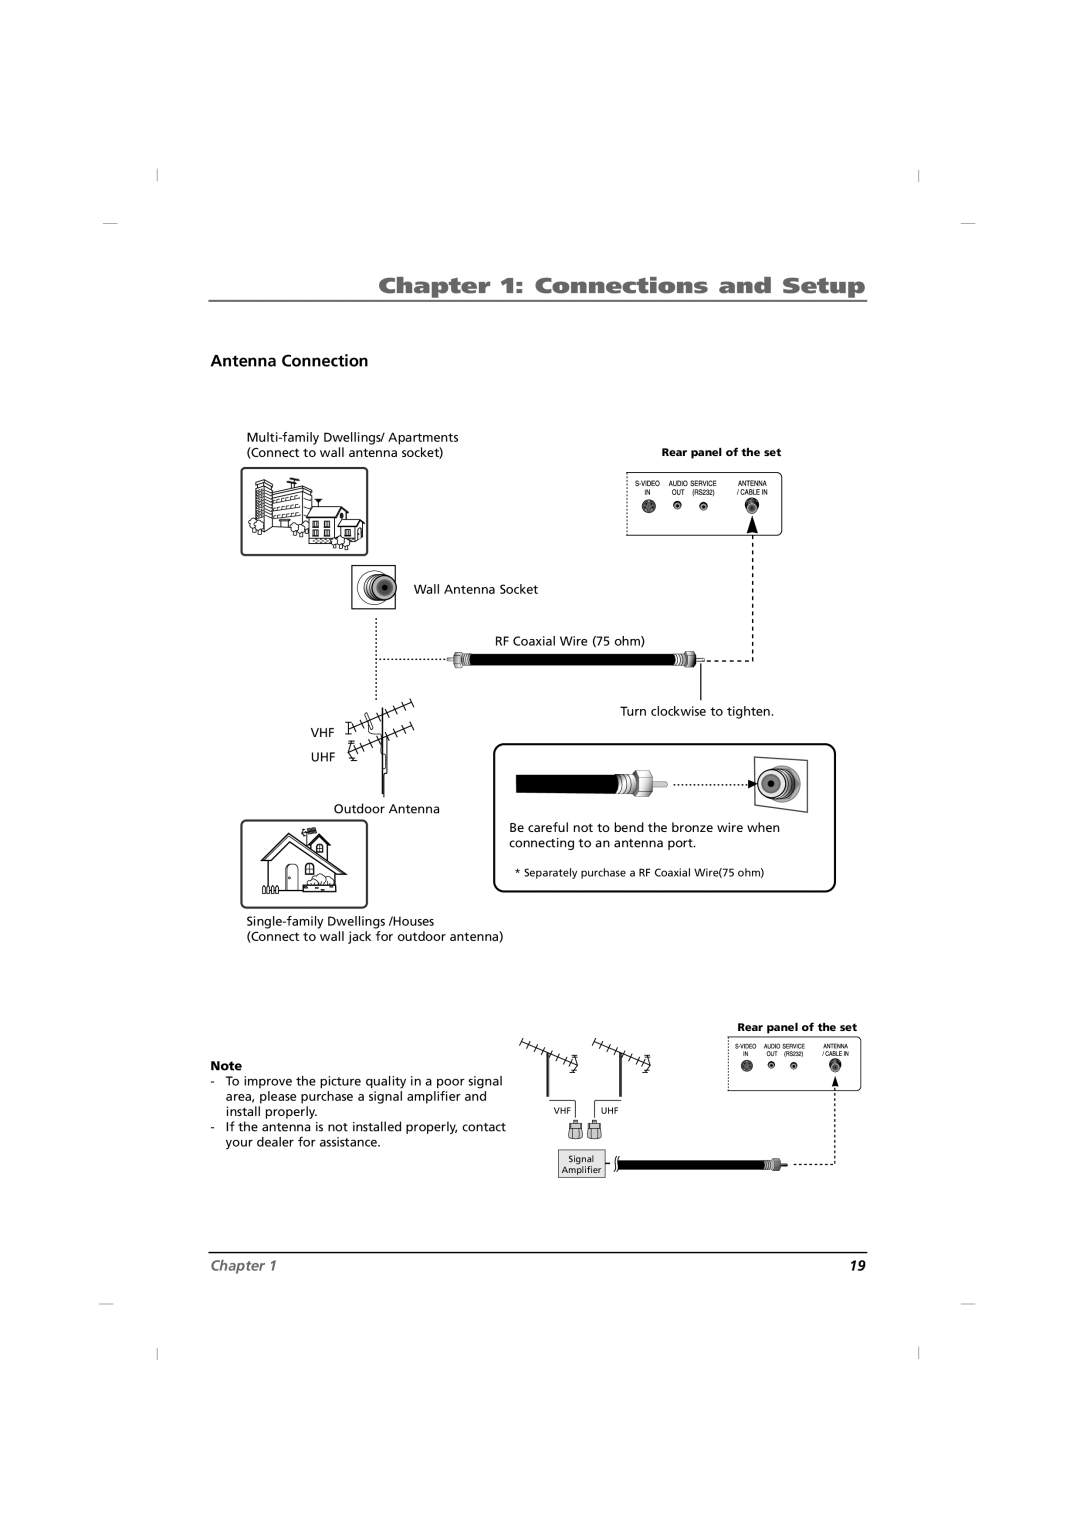 RCA J42HE820, J32HE720, J26HE820 manual Antenna Connection, Connections and Setup, Chapter 